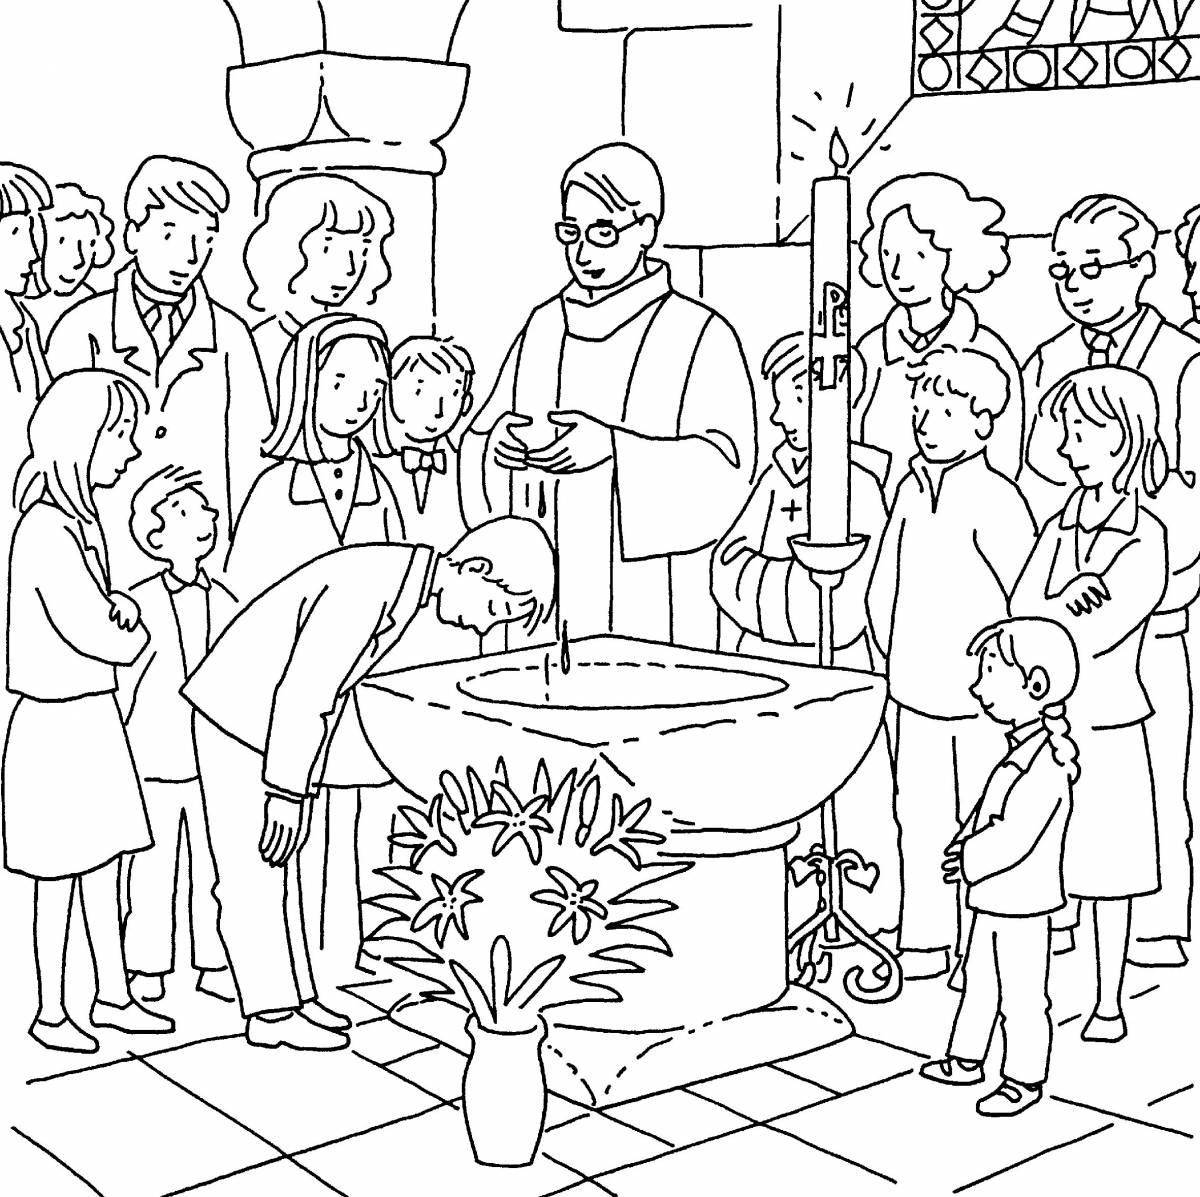 Coloring live card for baptism